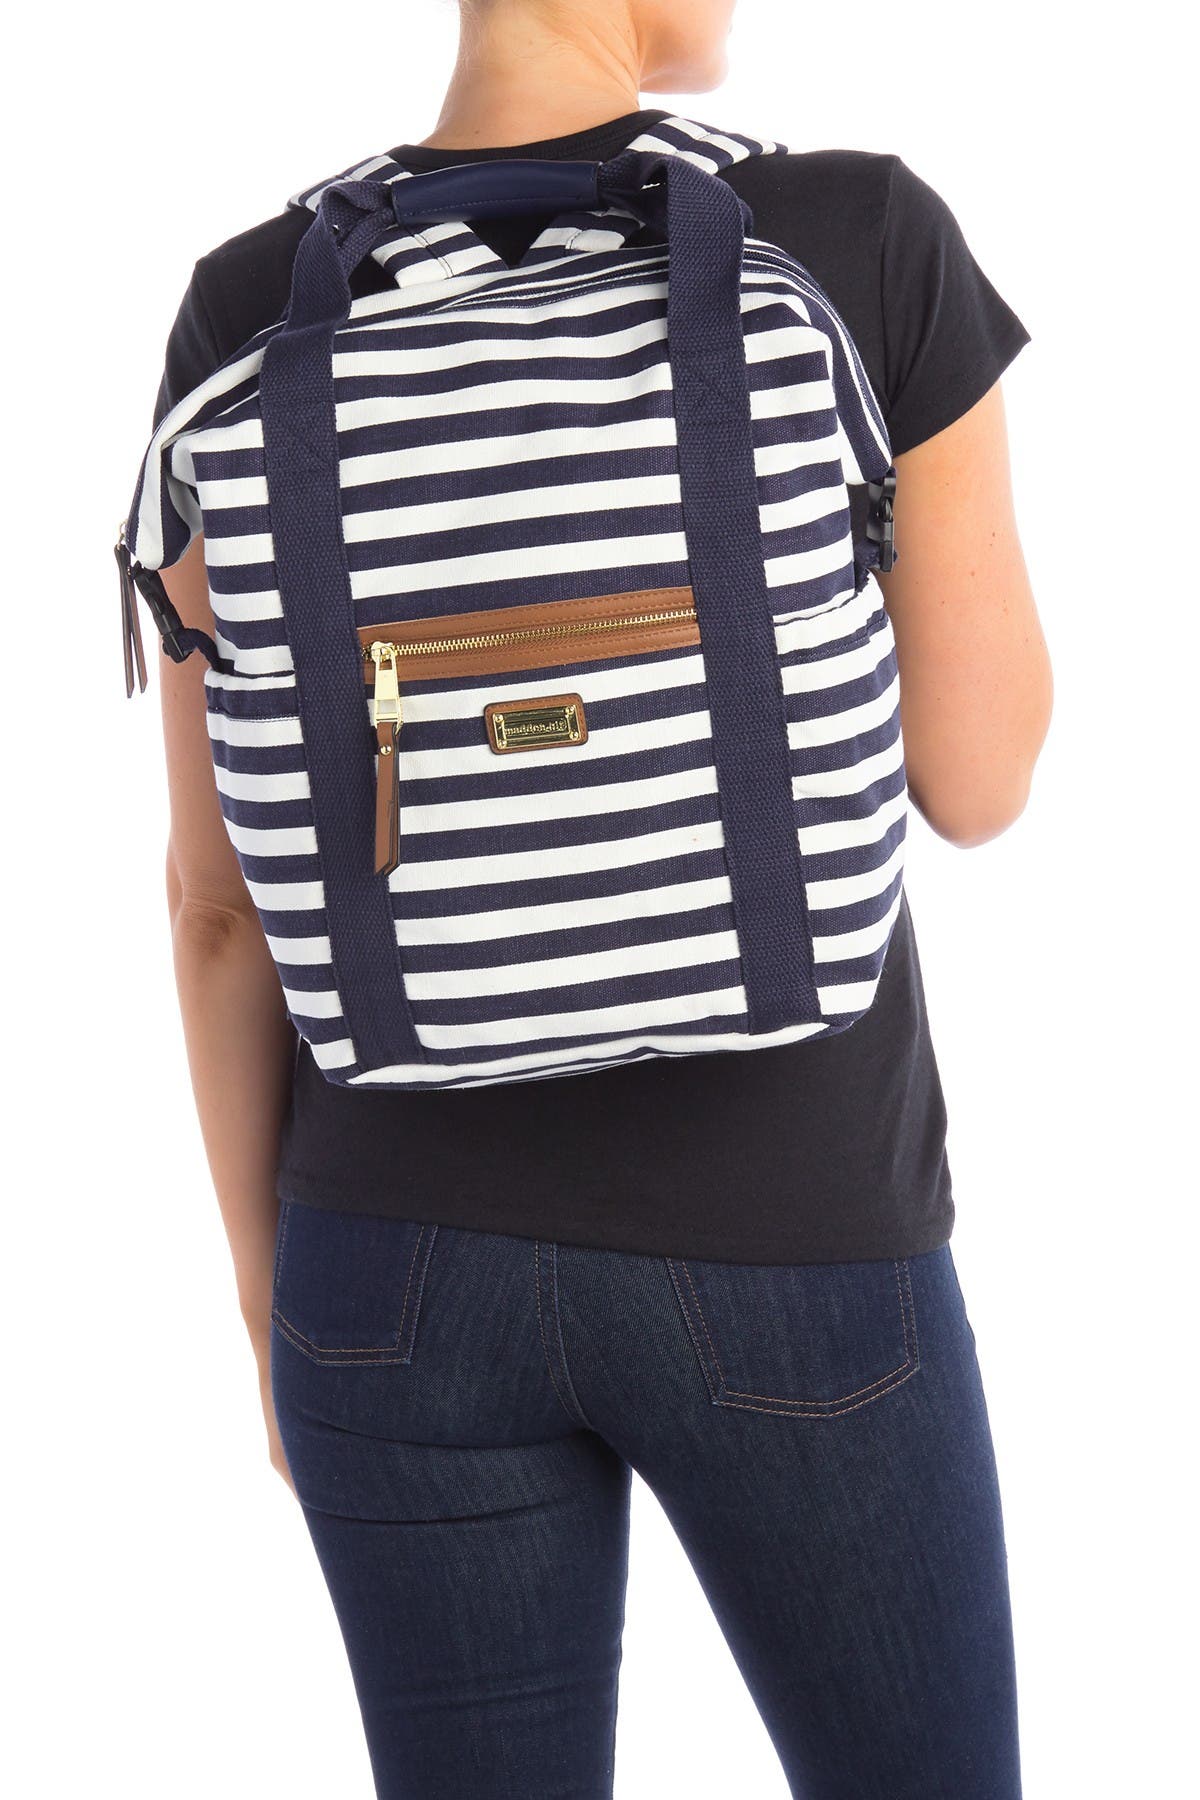 madden girl striped canvas backpack